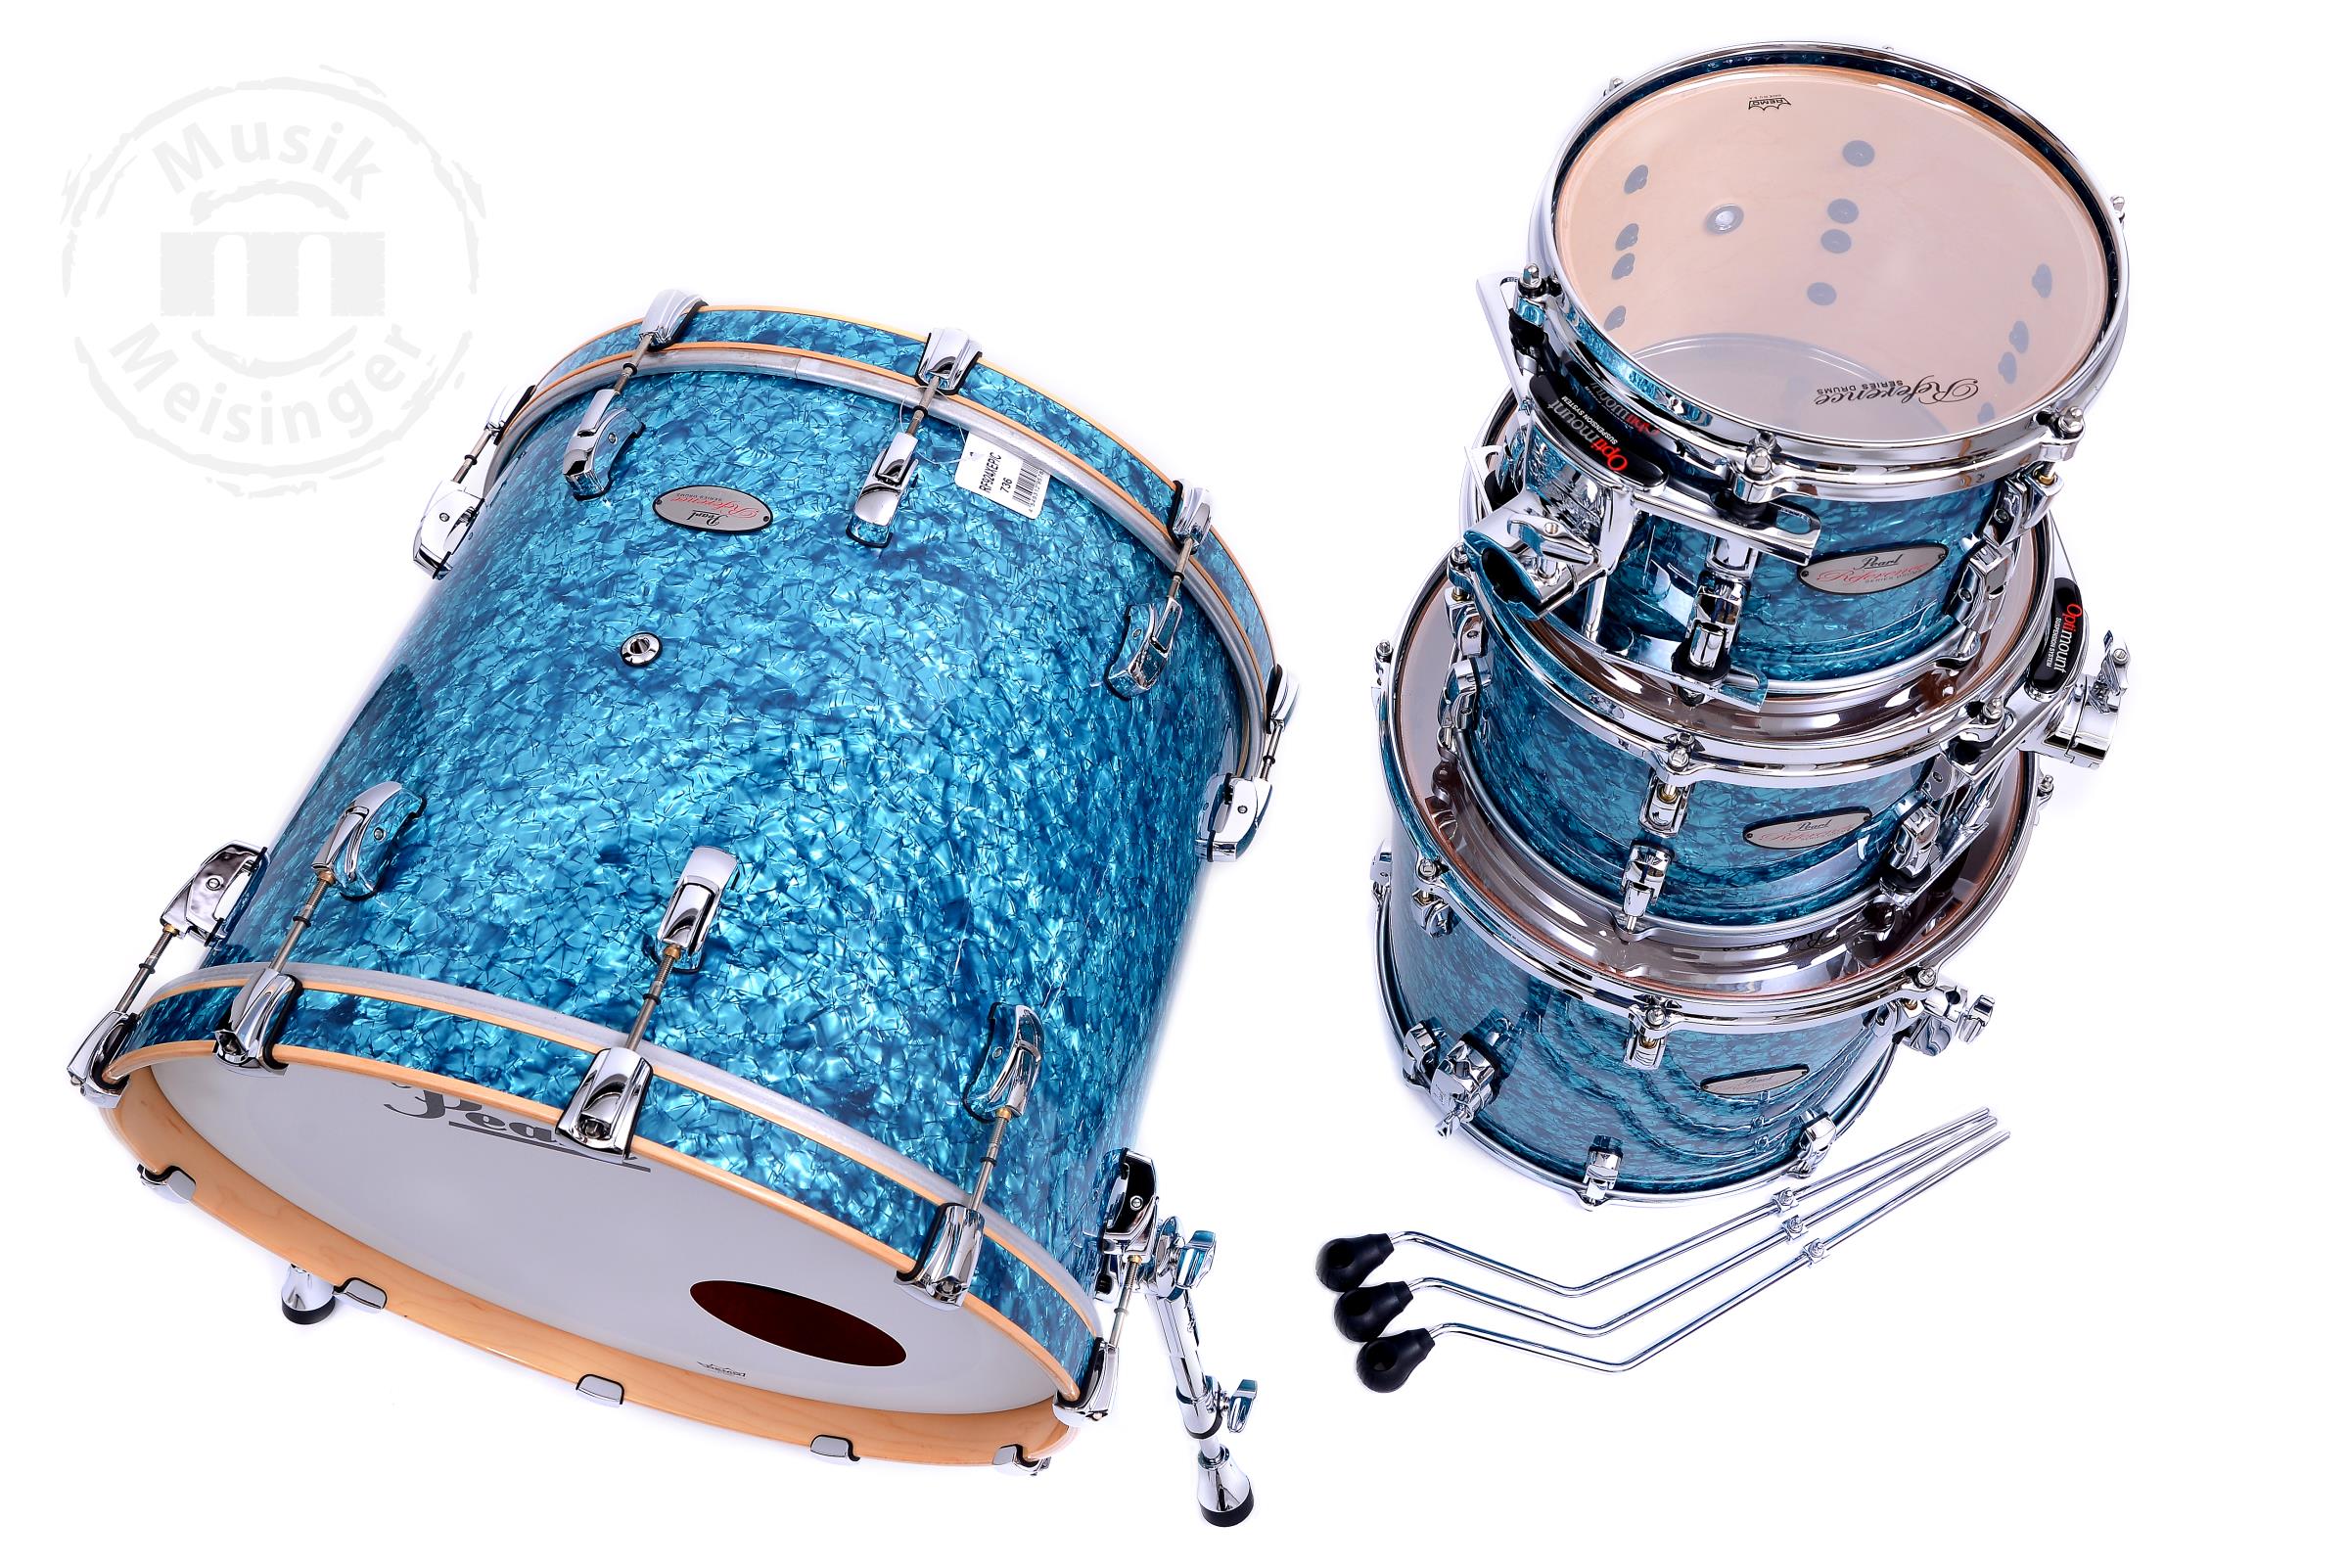 Pearl Reference 20B/10T/12T/14FT Turquoise Pearl